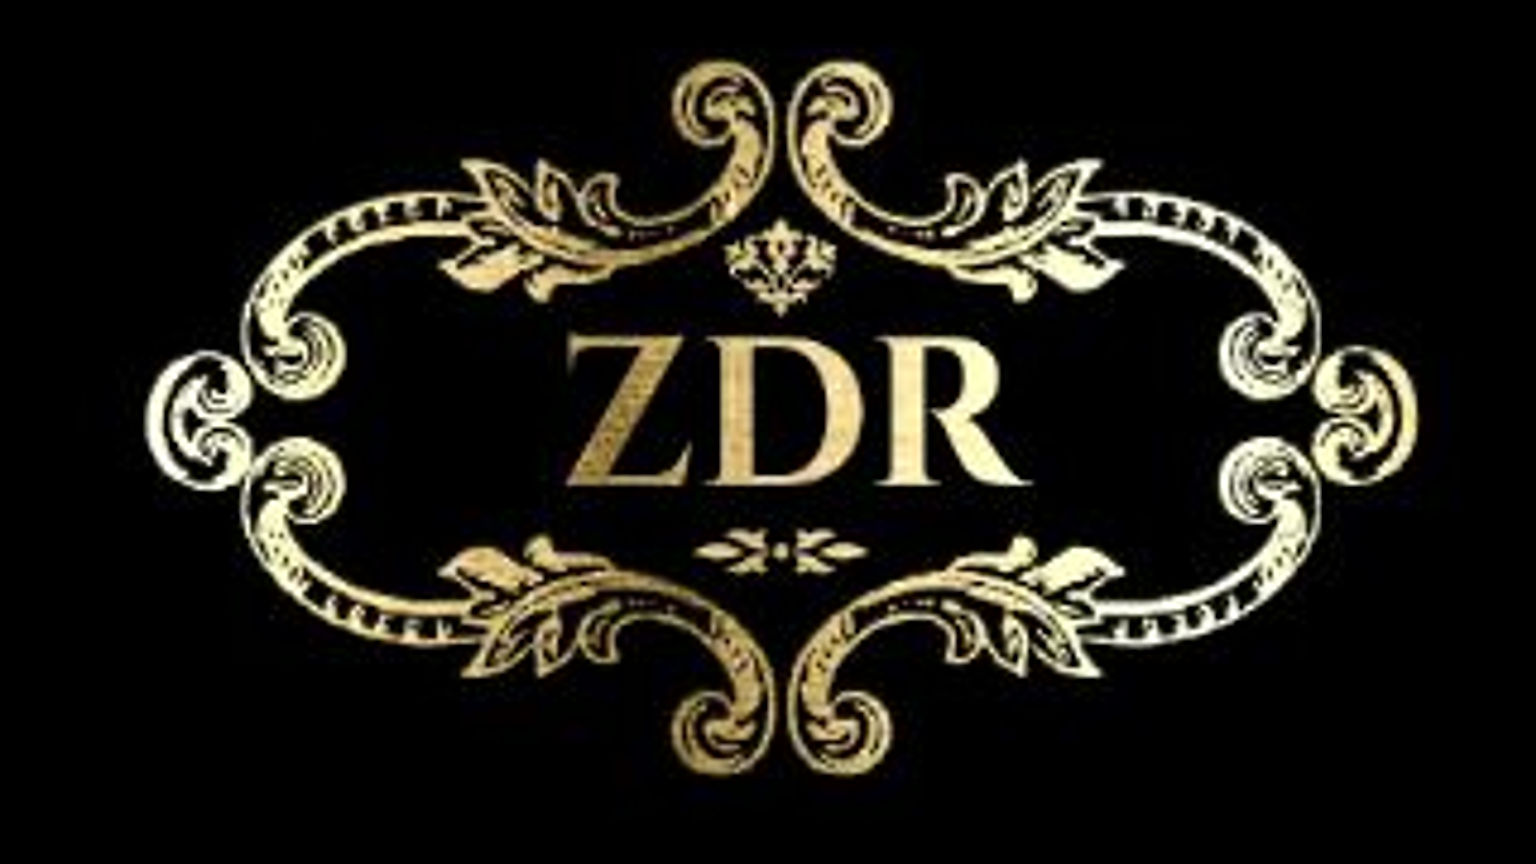 ZDR Events